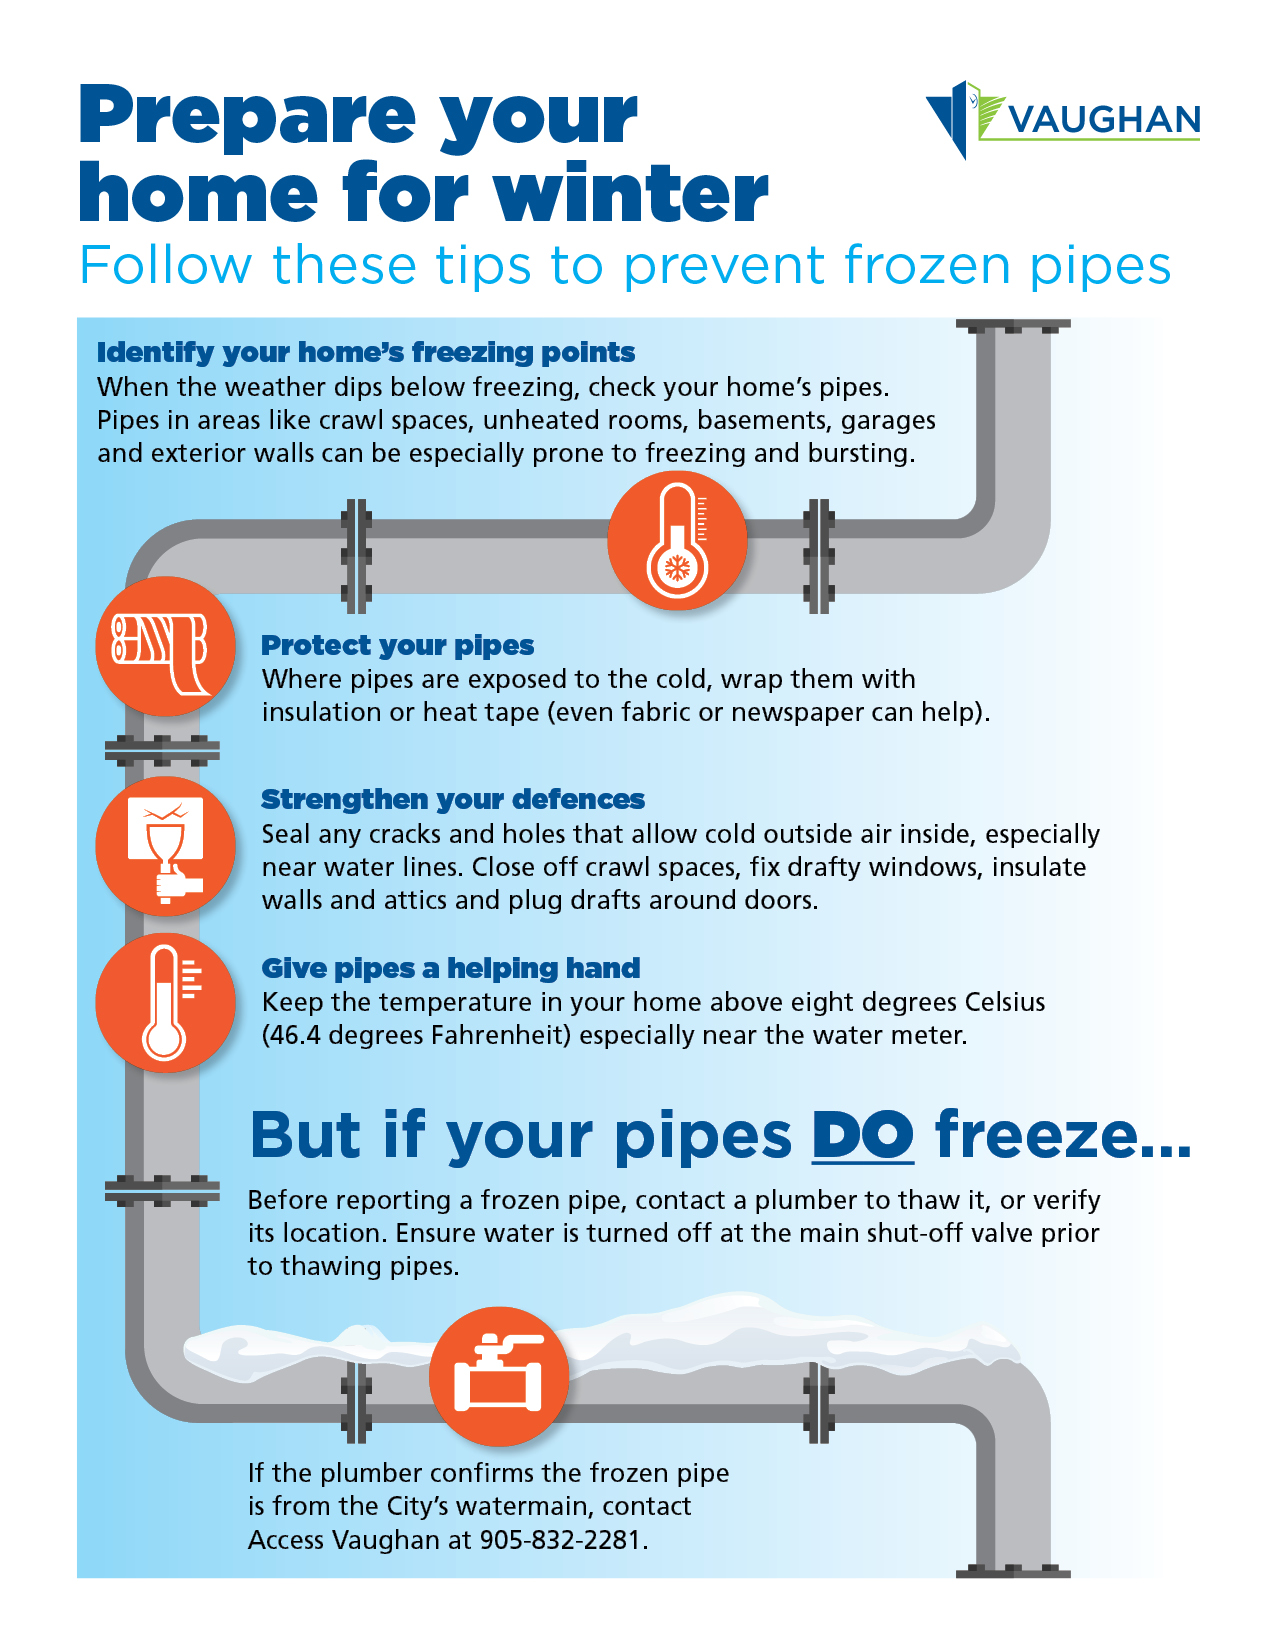 Prepare your home for winter - tips to prevent frozen pipes (pdf)